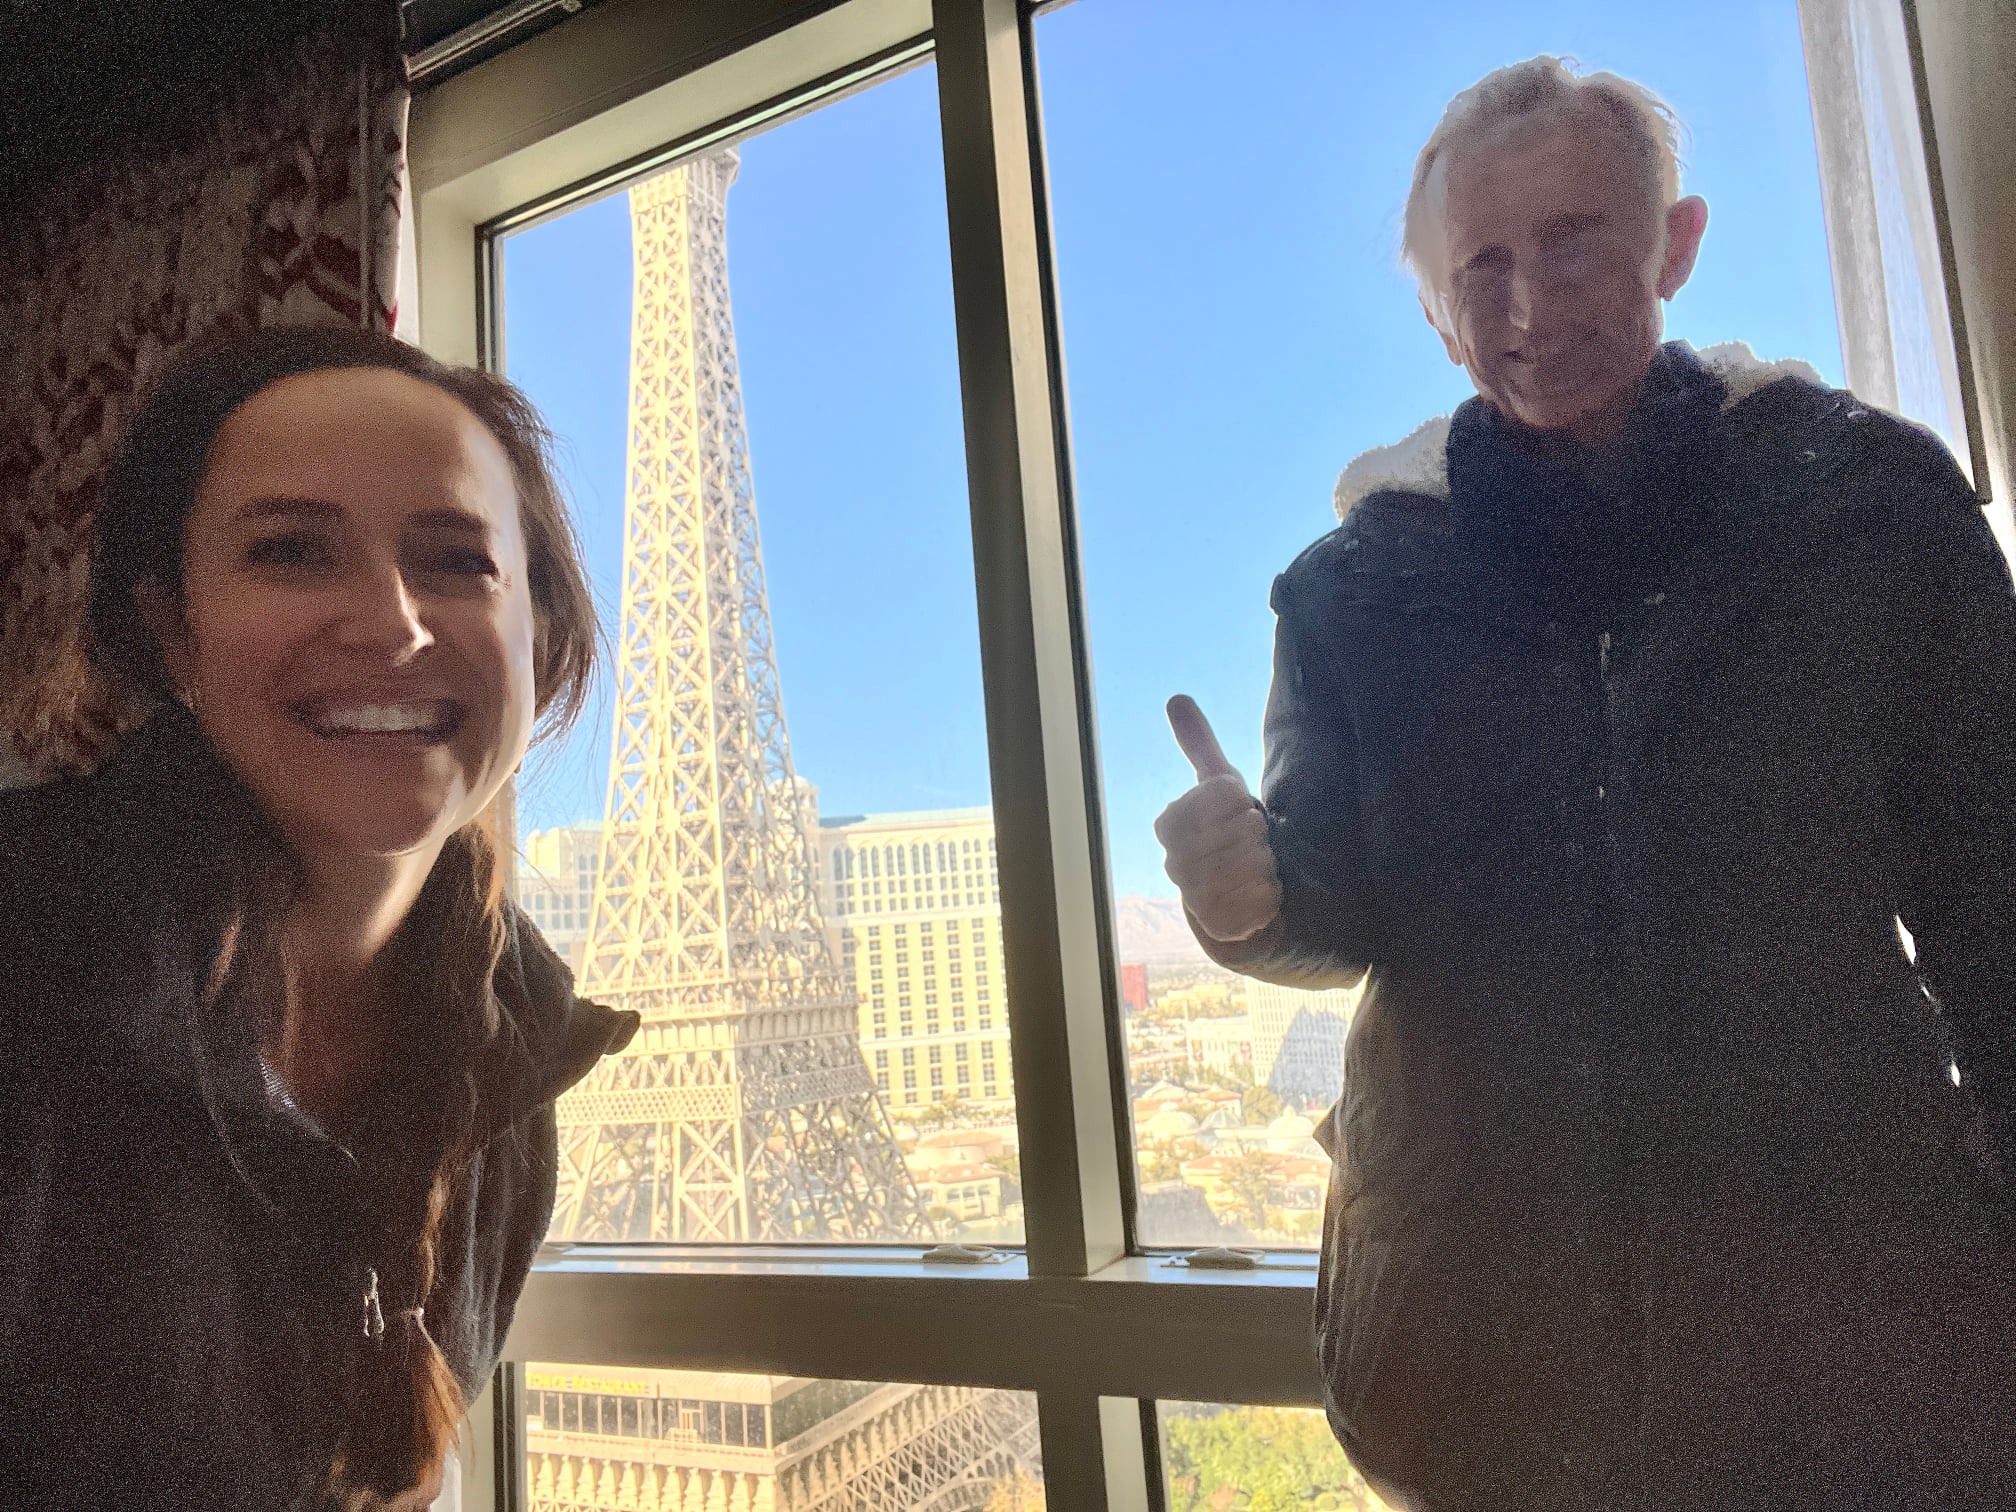 a woman named vanessa mitchell-delomotte and her dad, patrick mitchell, posing for a selfie with the view of the las vegas eiffel tower in the background as seen through a window 